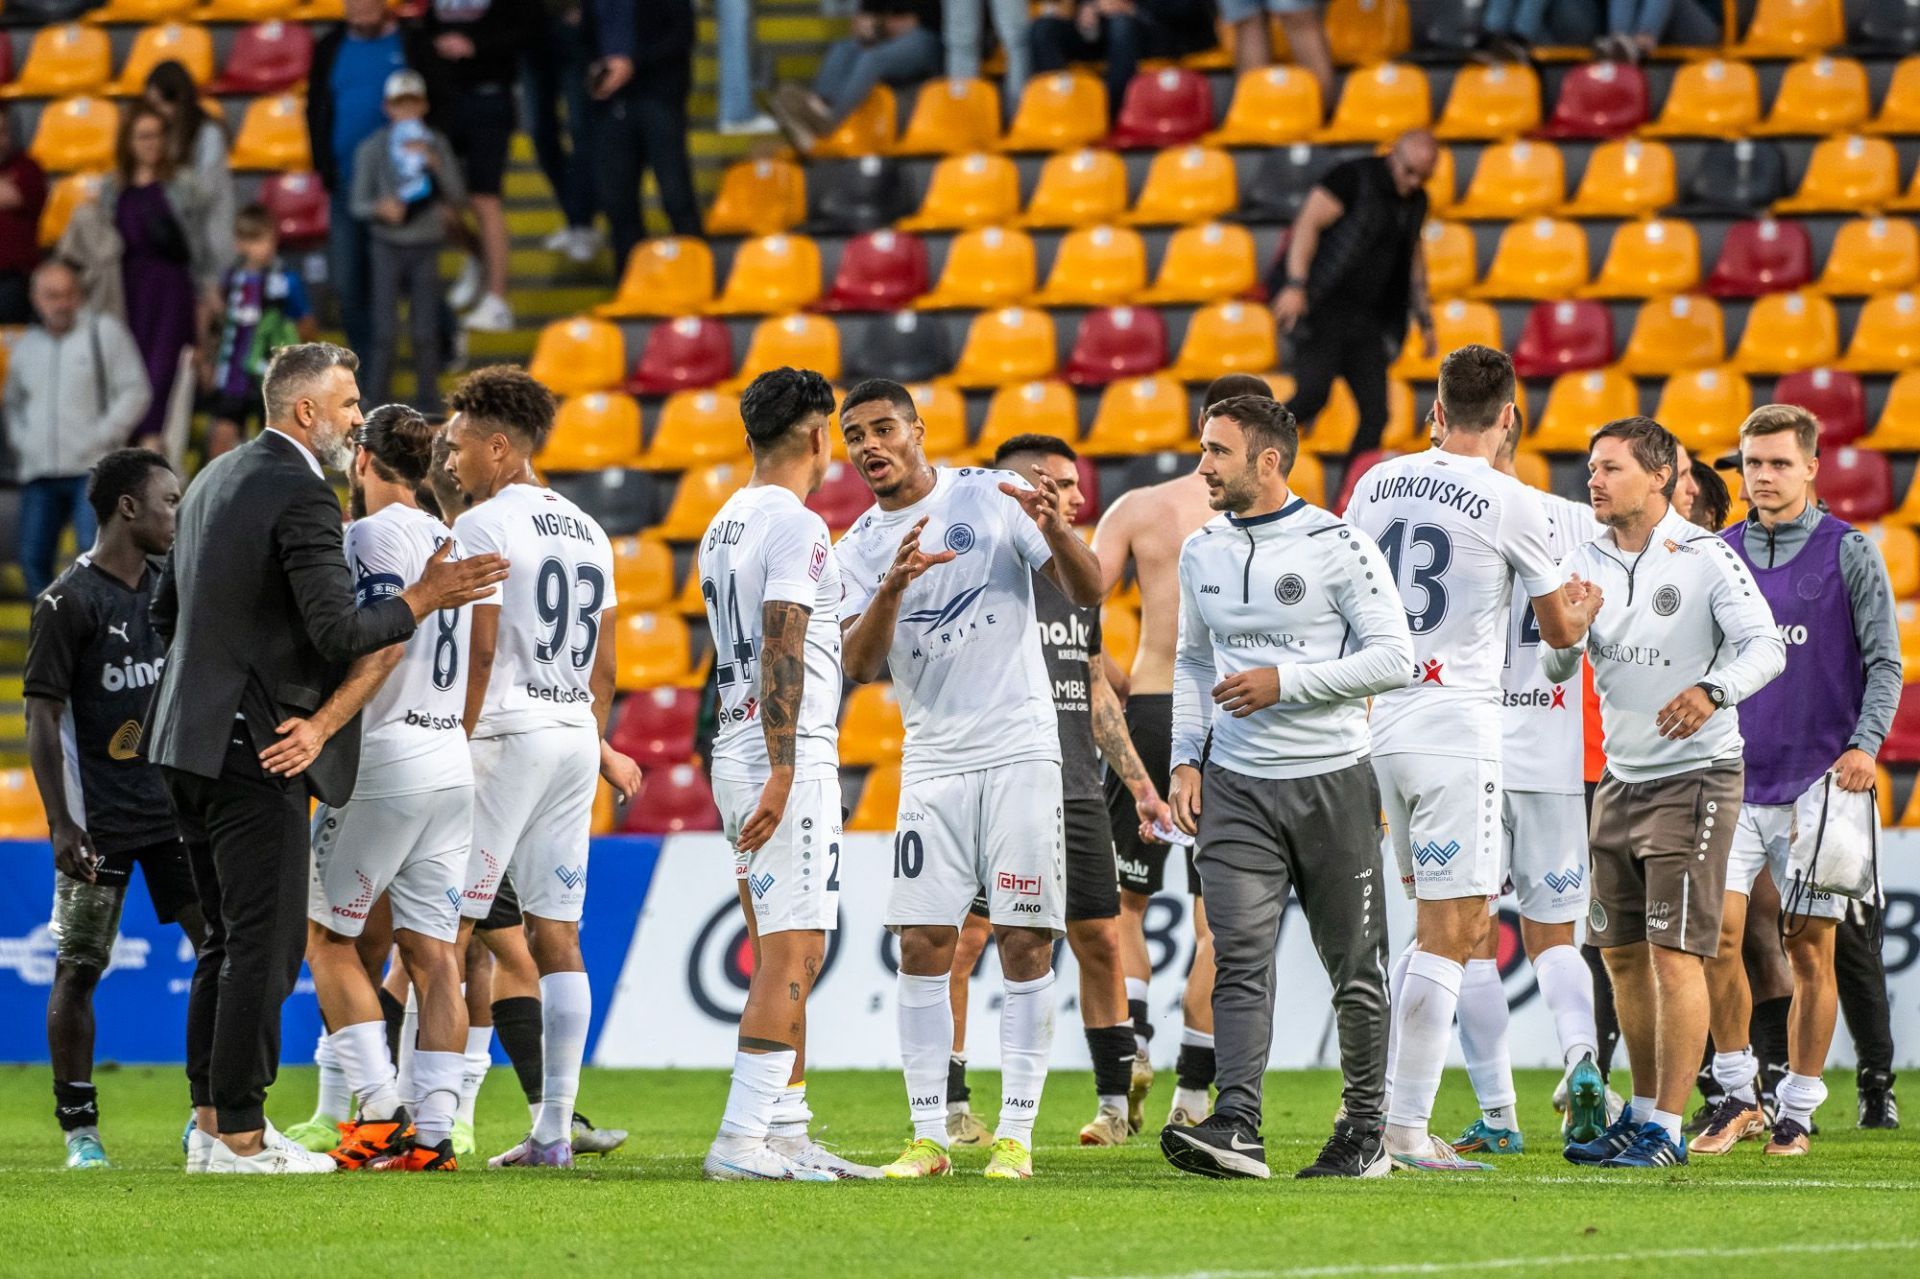 Riga take on Vikingur in the Europa Conference League qualifiers on Thursday